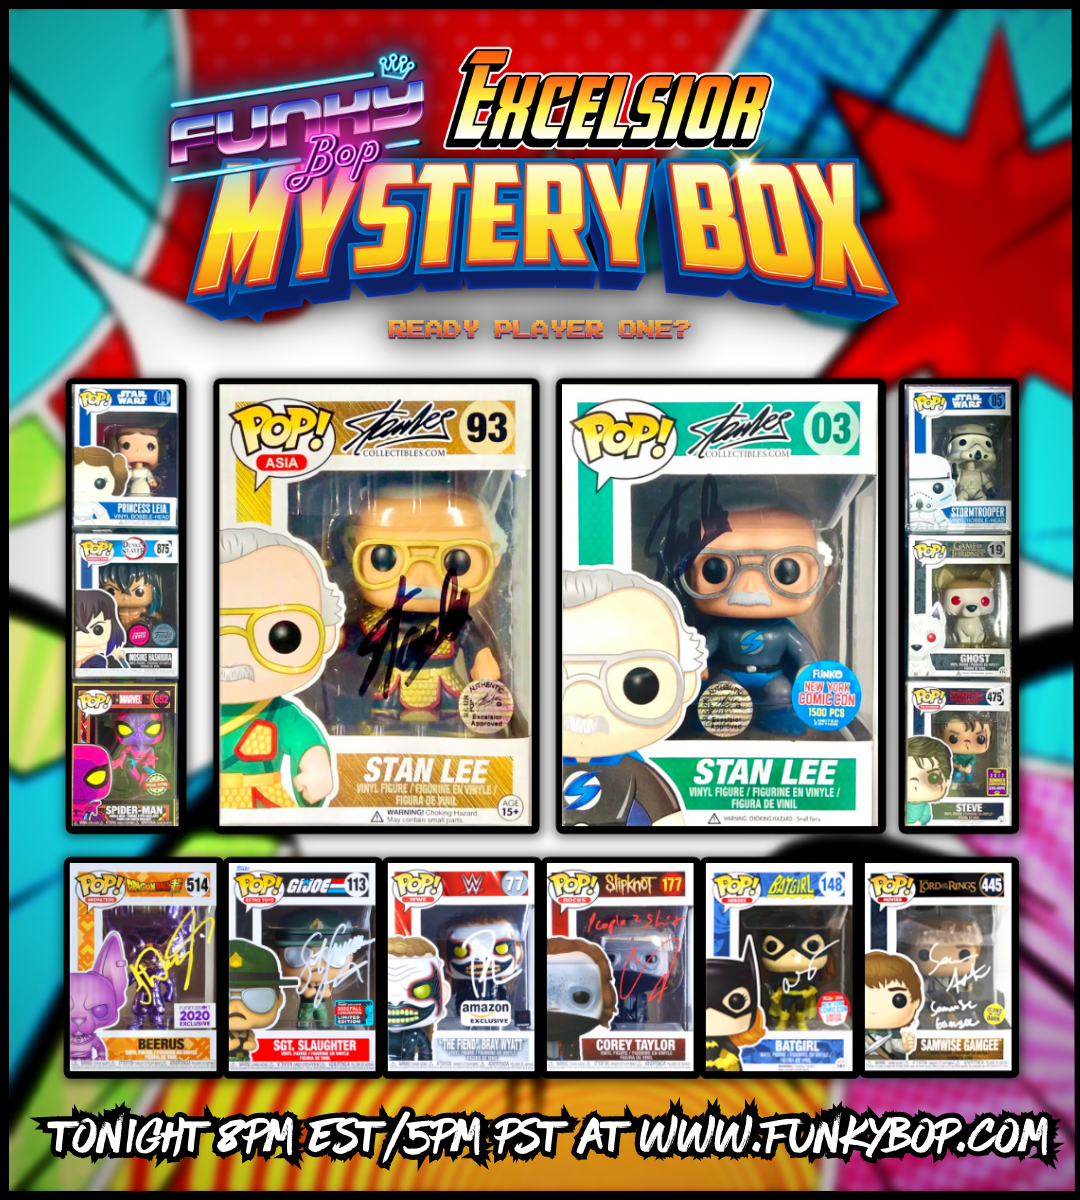 Funky Bop EXCELSIOR Mystery Box - 1.12